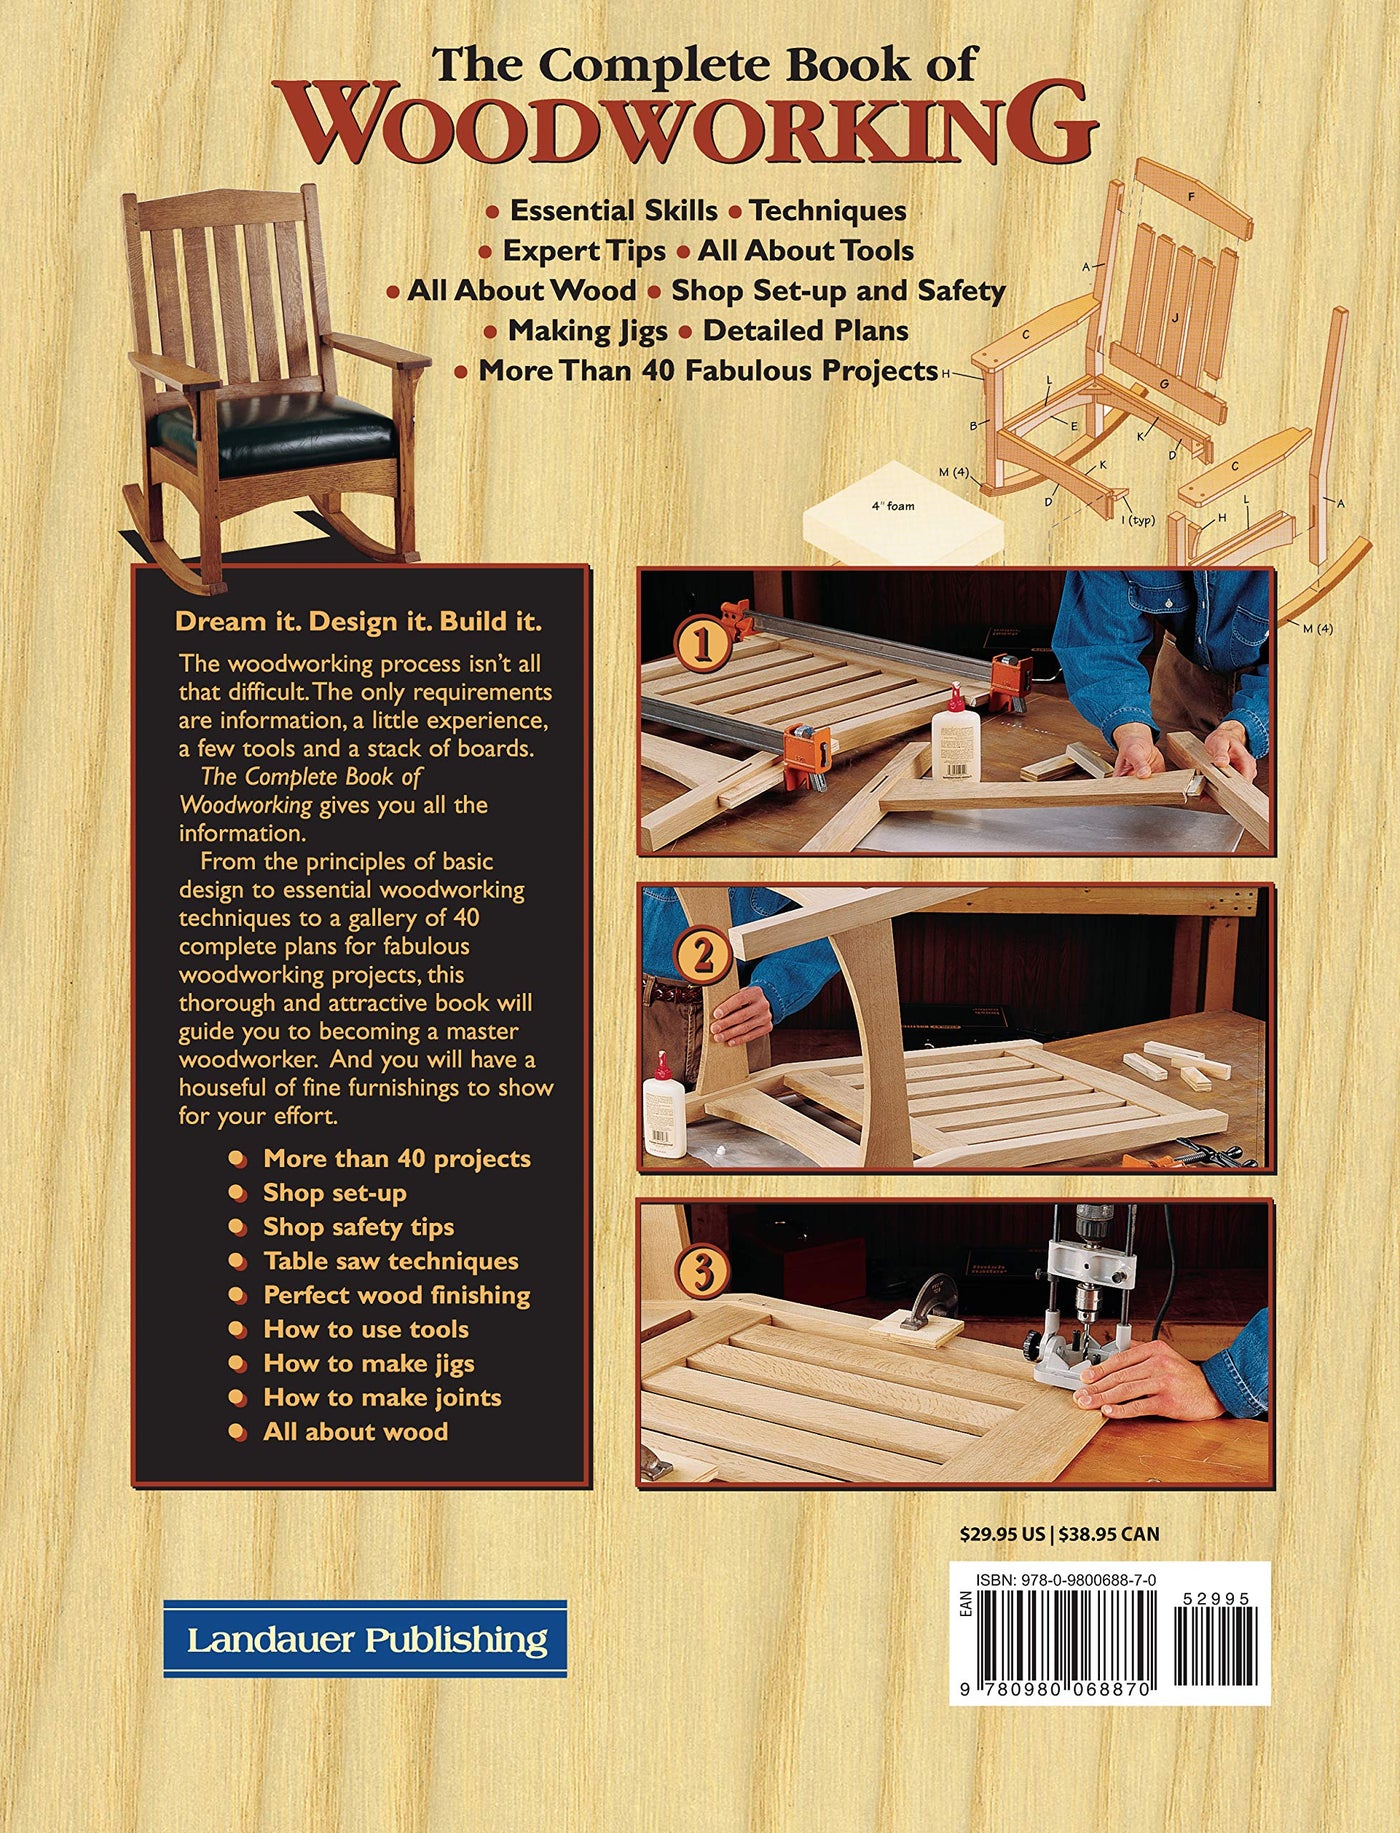 The Complete Book of Woodworking: Step-by-Step Guide to Essential Woodworking Skills, Techniques and Tips and Over 200 Photos (Spiral Bound)